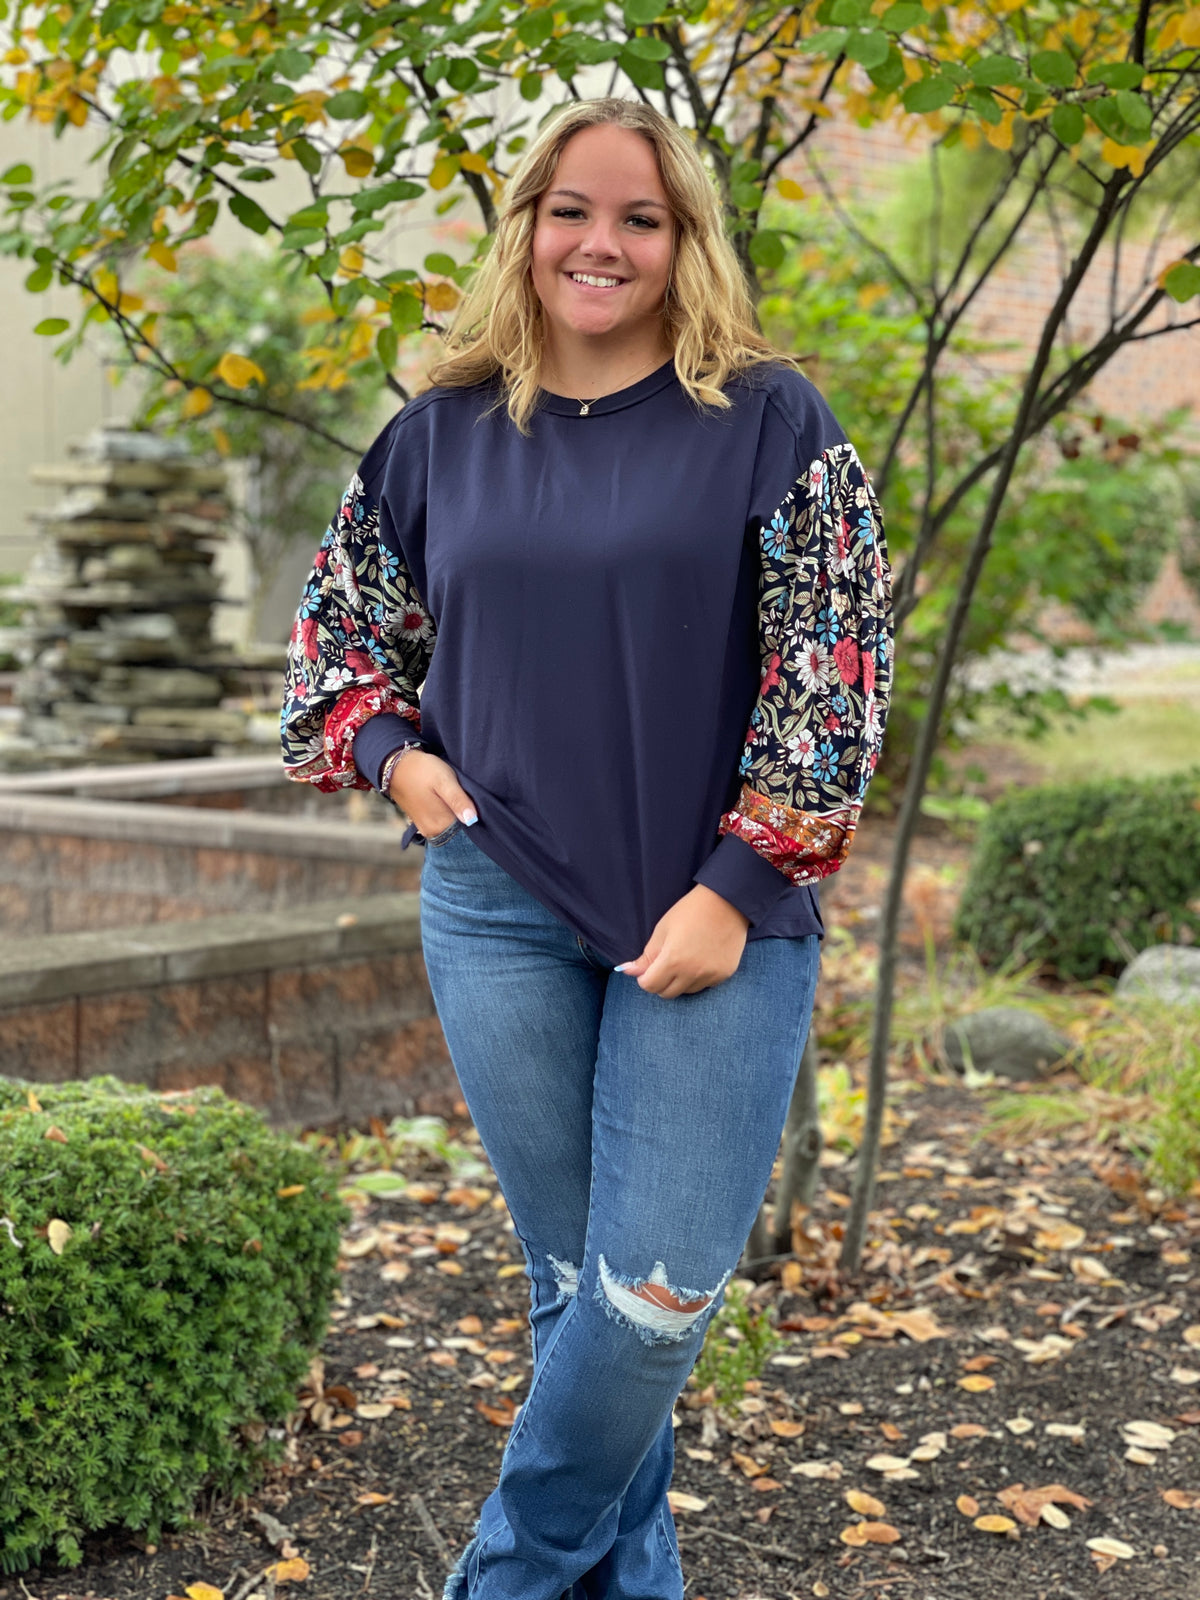 NAVY COTTON TOP W/ FLORAL CONTRAST SLEEVES